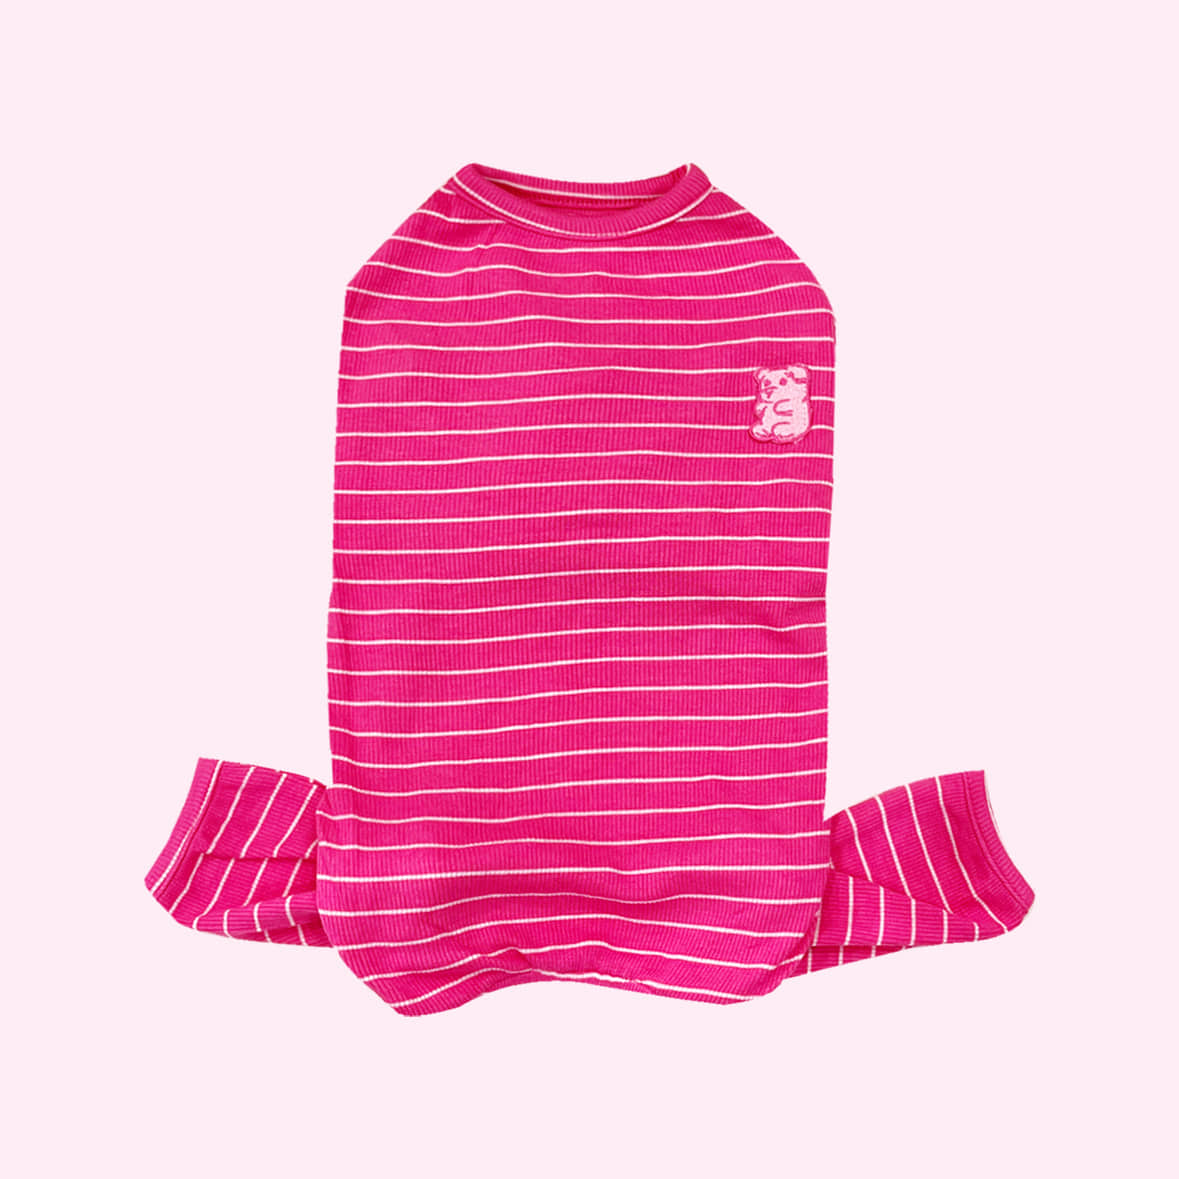 Mochi Striped All-in-One (Pink)